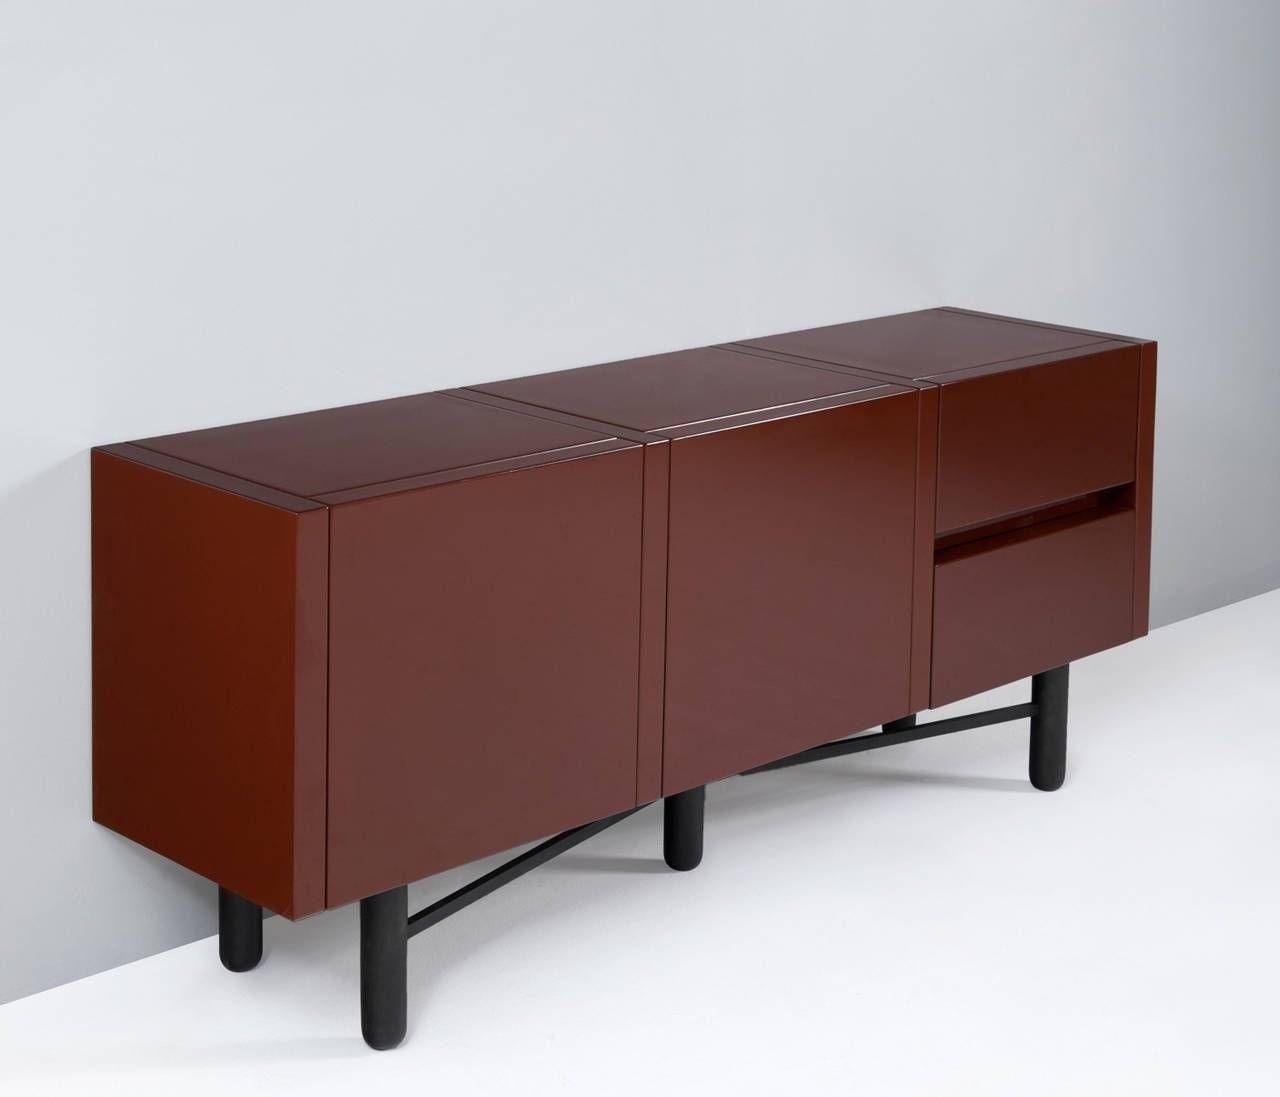 Roche Bobois Red Lacquered High Gloss Sideboard For Sale At 1stdibs Regarding High Gloss Black Sideboard (Photo 6 of 20)